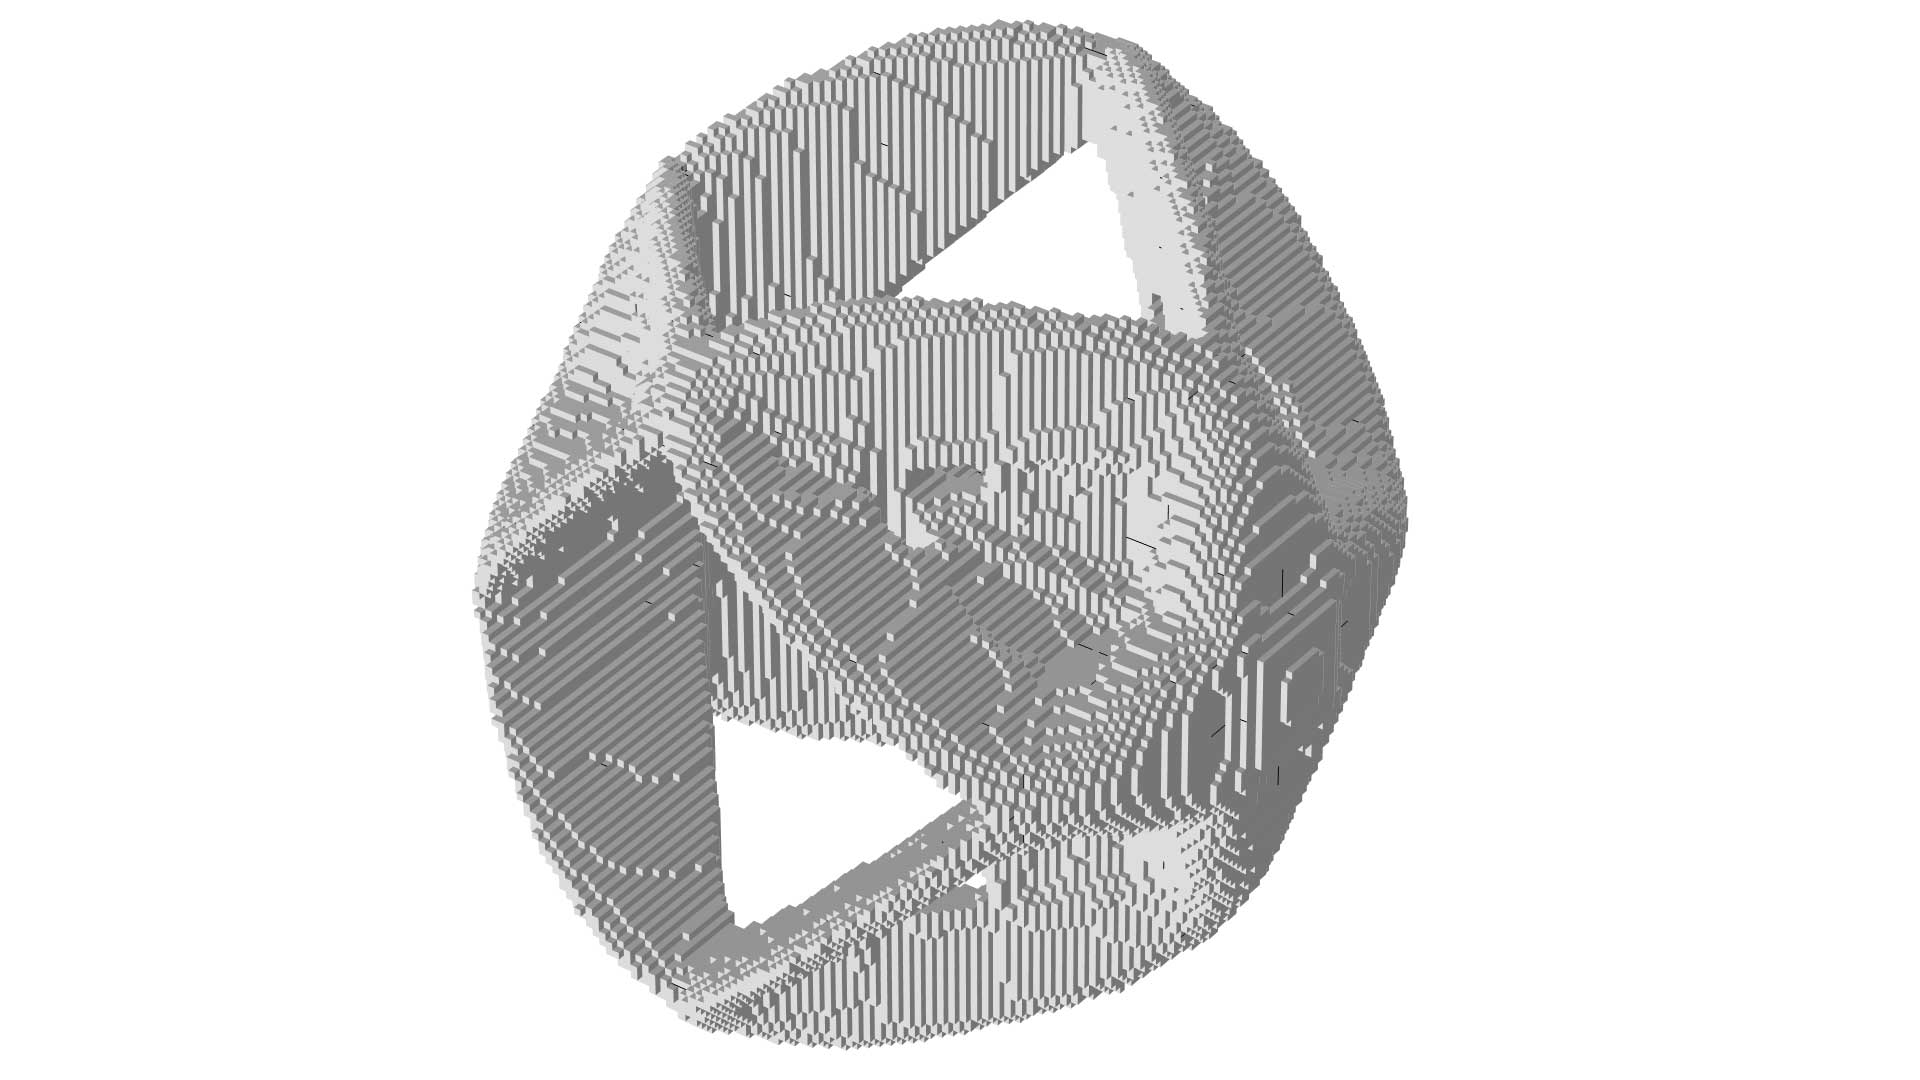 A torsion sphere model with two symmetry planes.